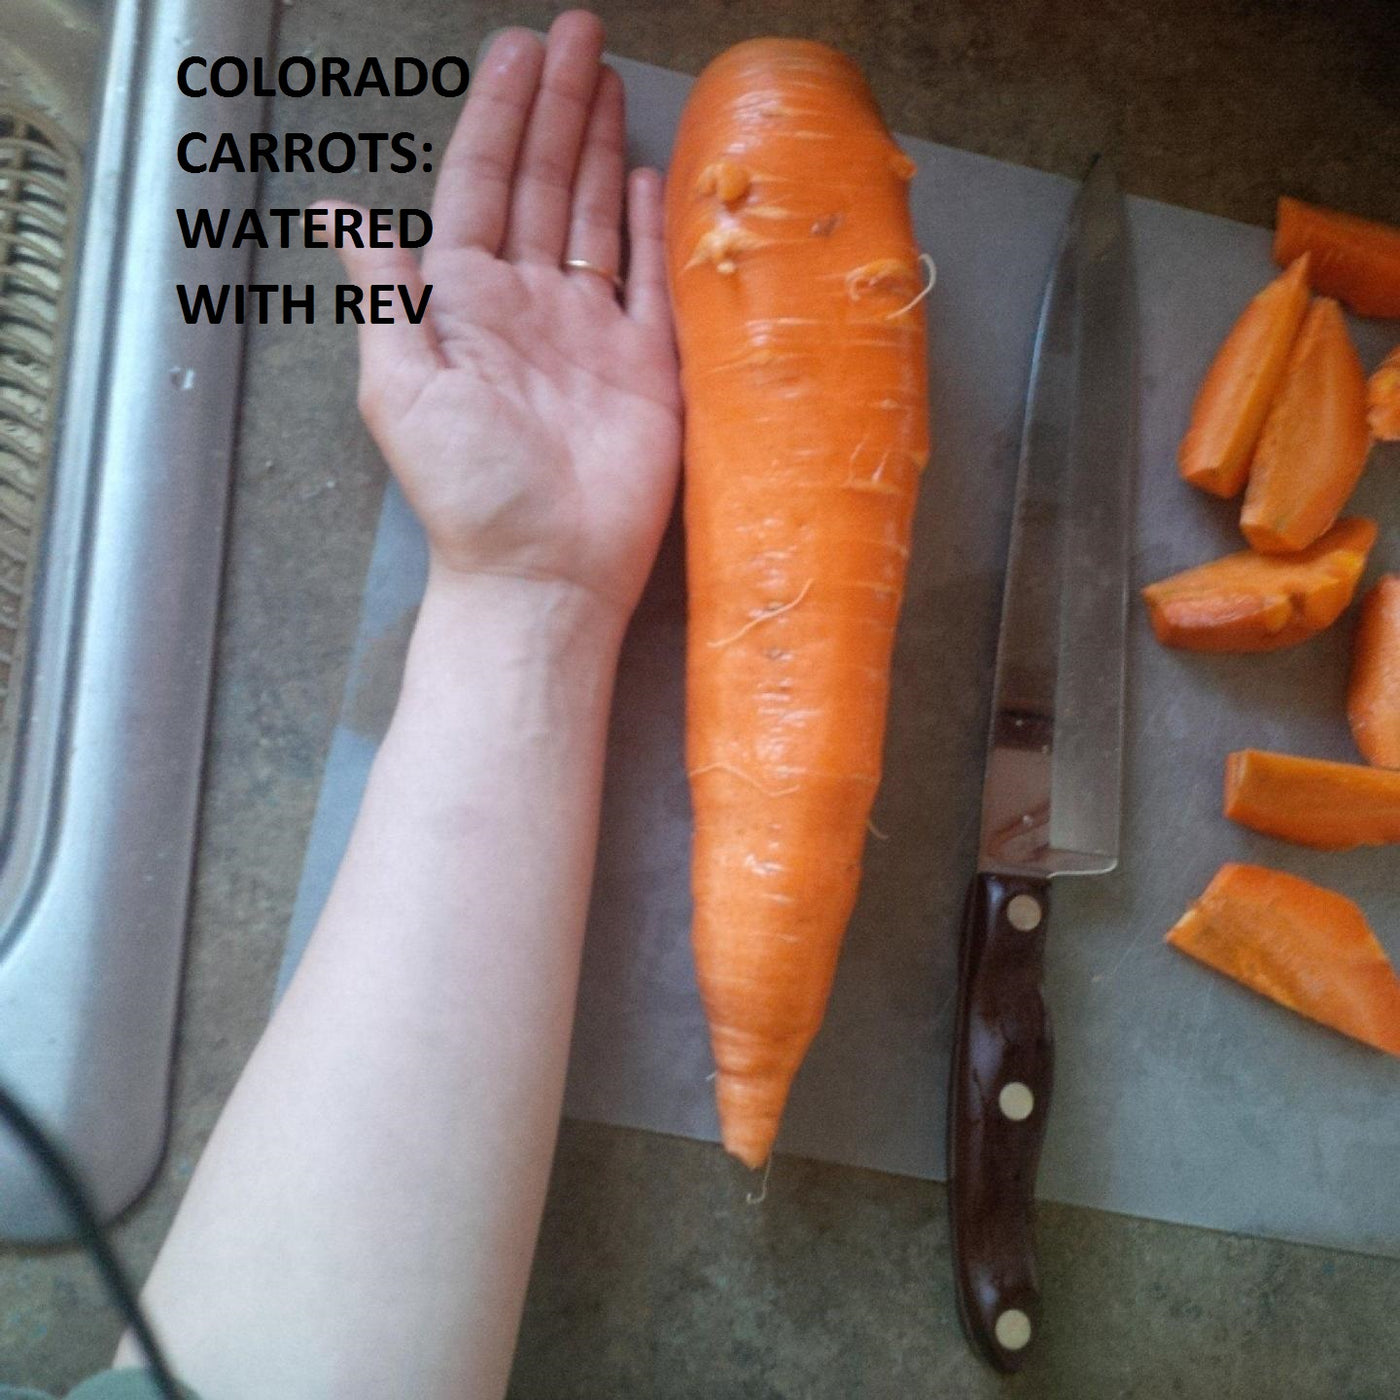 Carrot Grown with REV